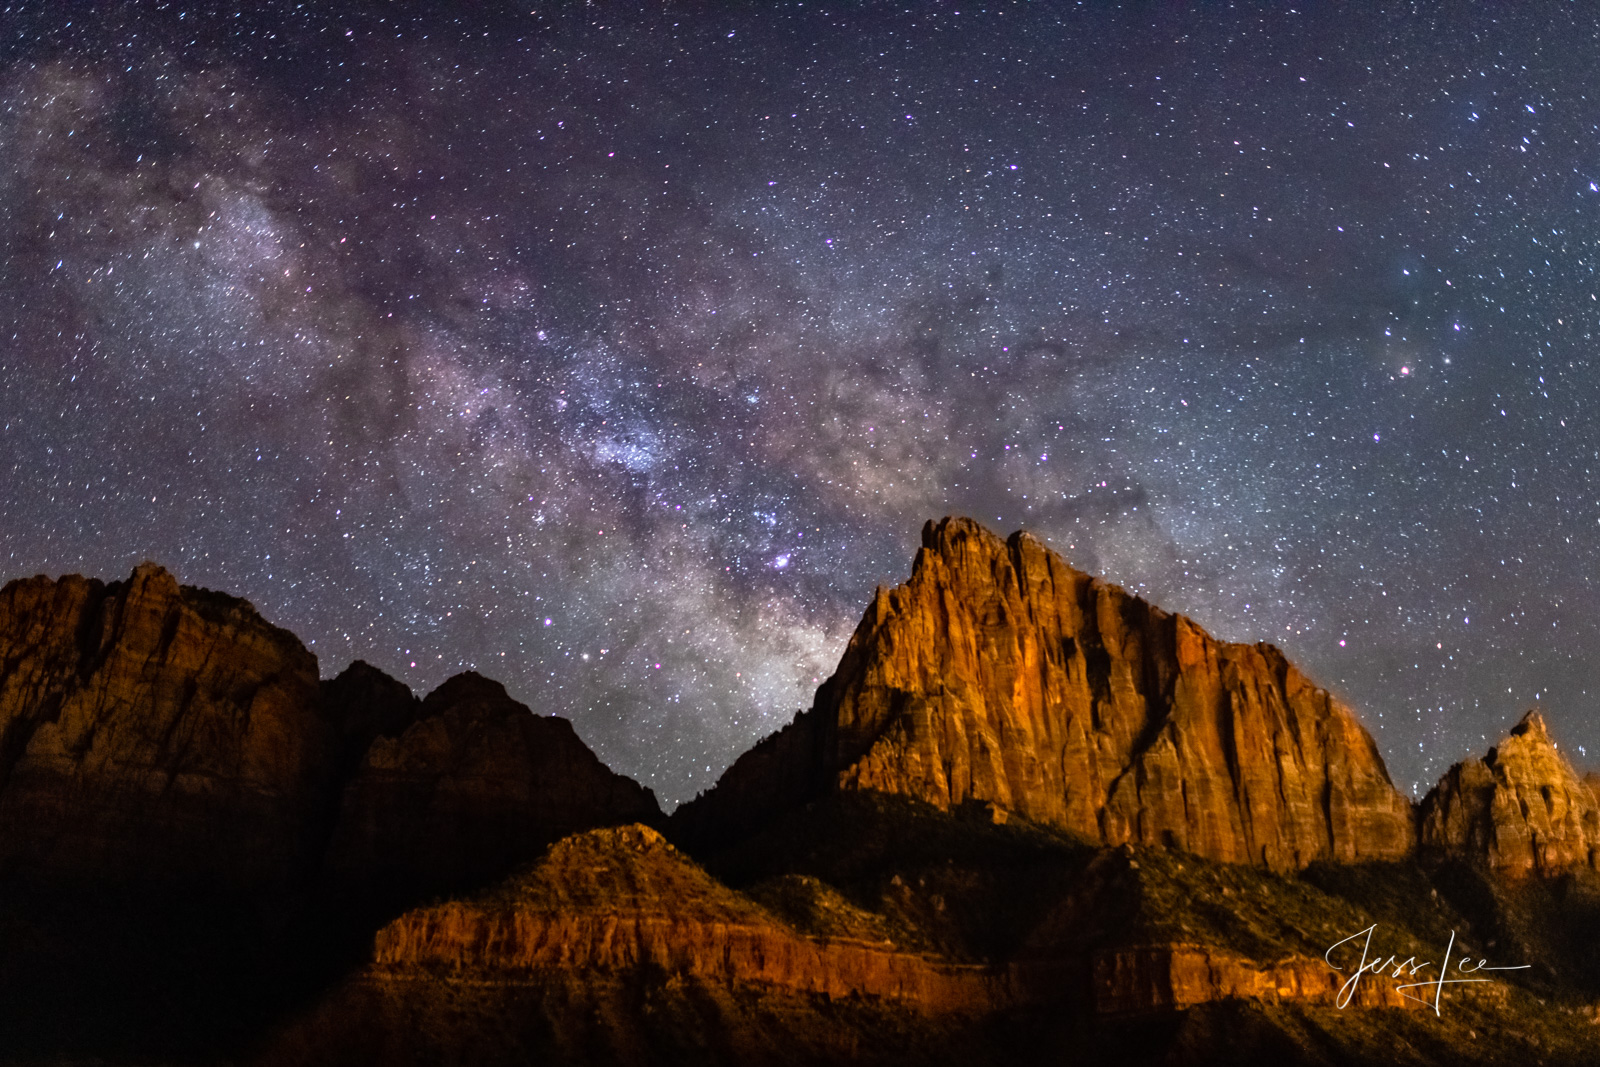 Zion National Park Watchman with Milky Way photograph